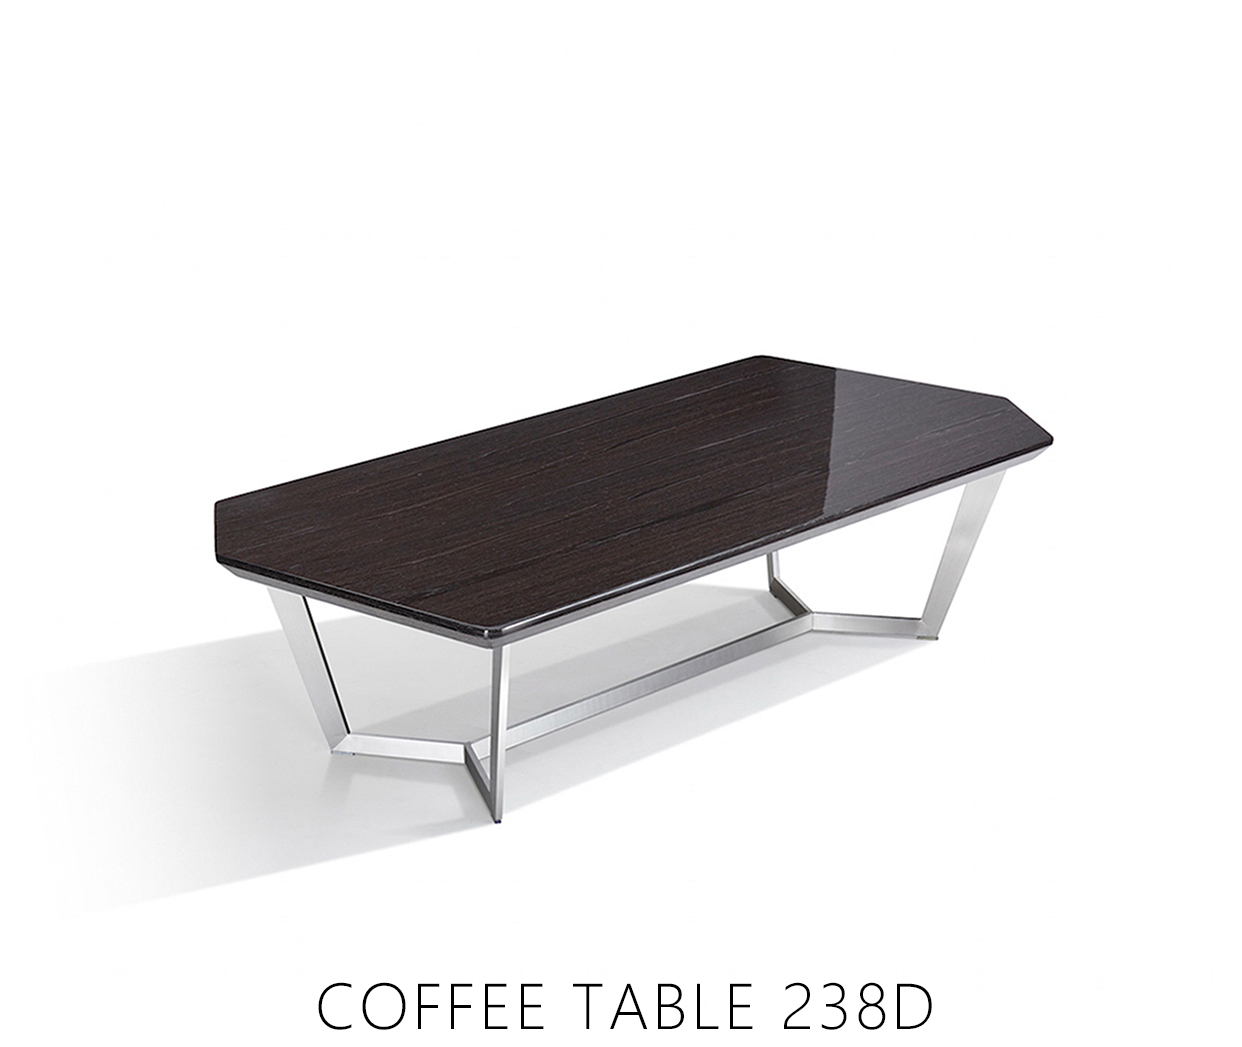 COFFEE TABLE 238D